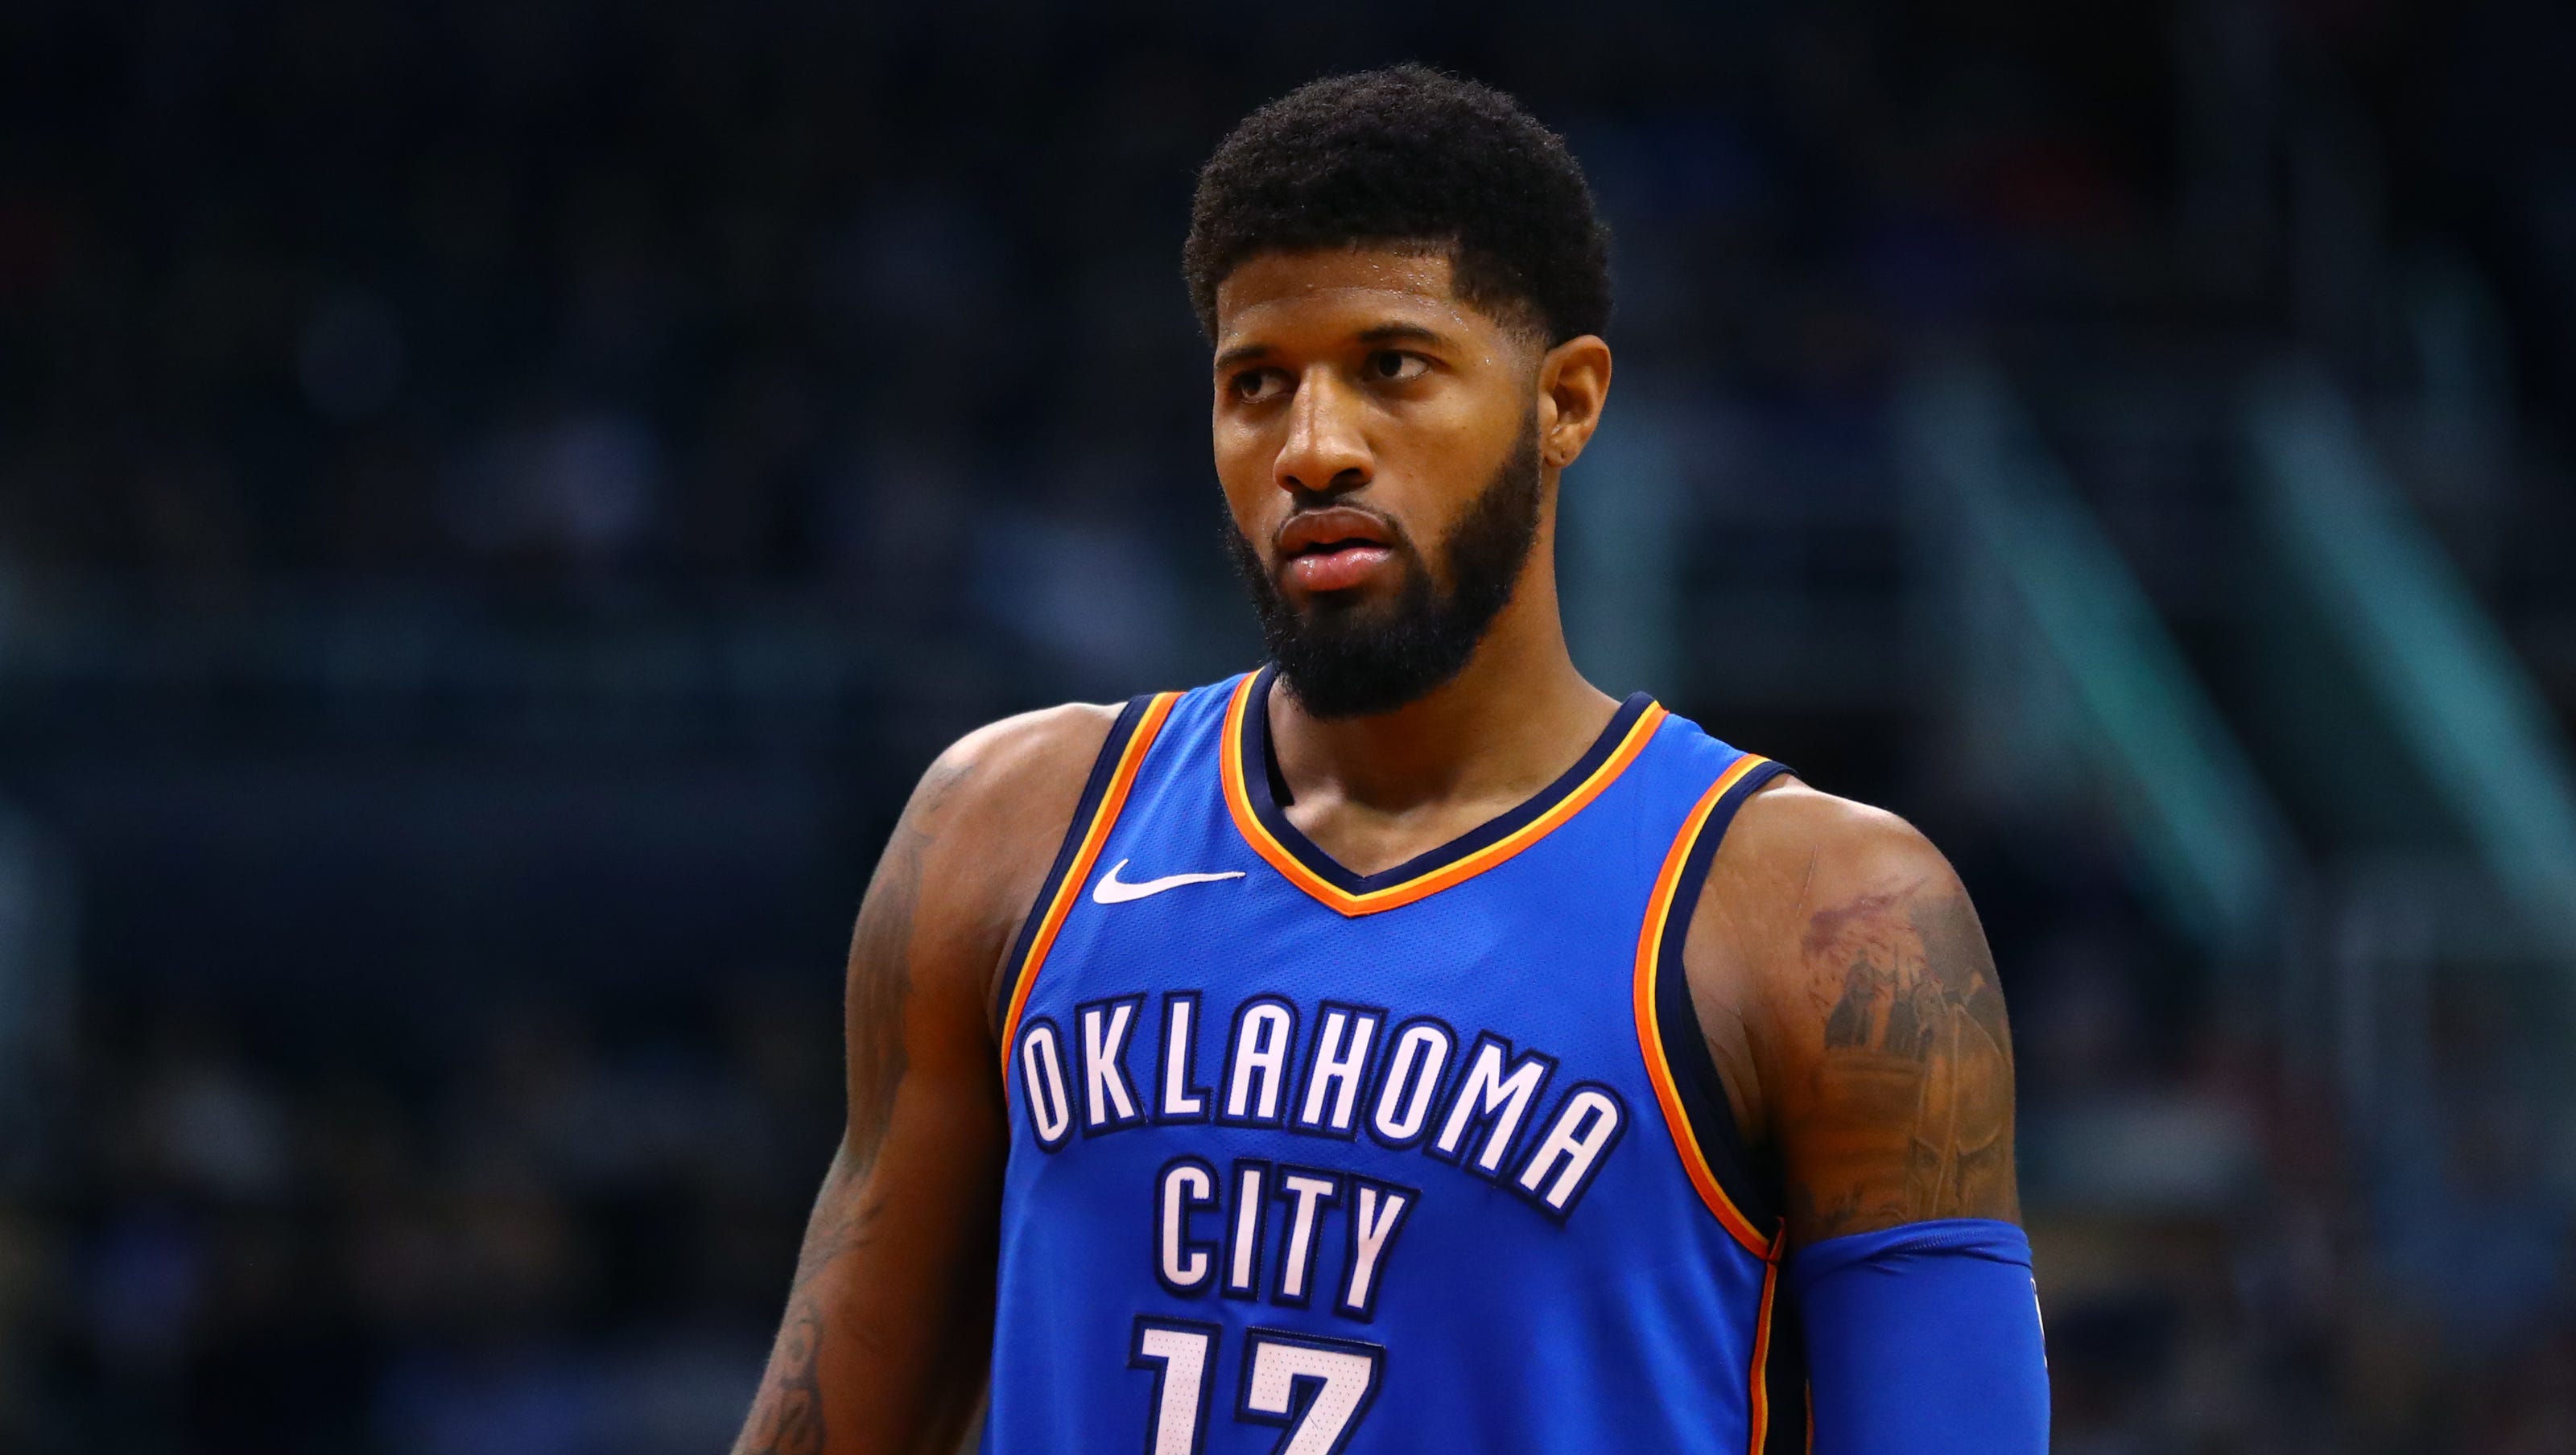 Paul to opt out of contract with Oklahoma City Thunder